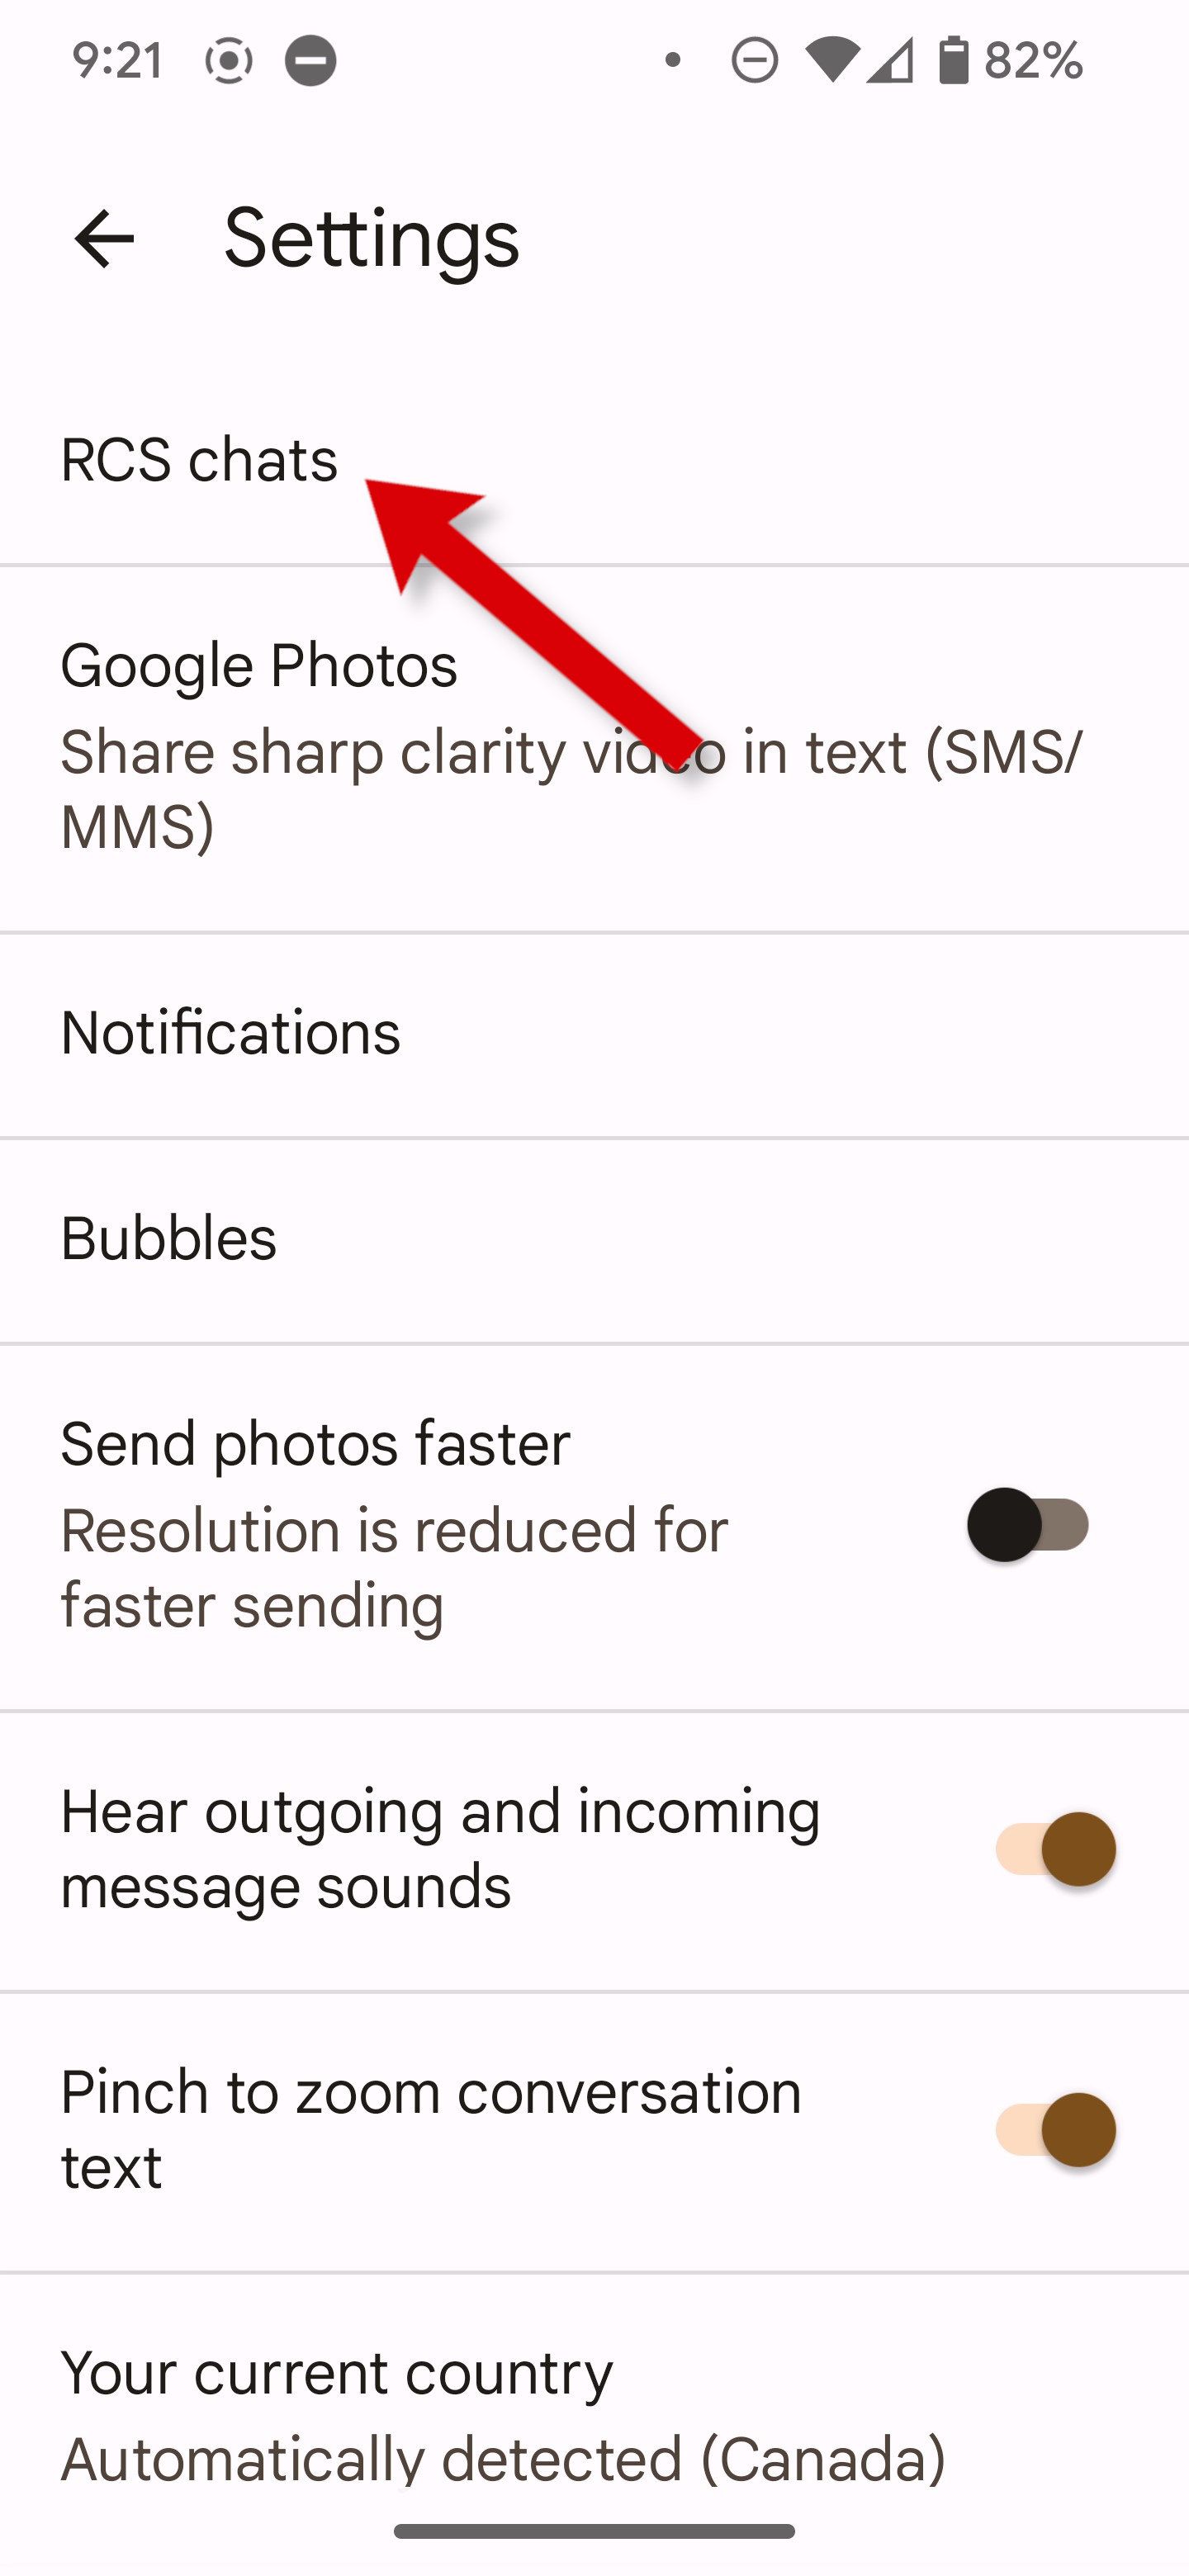 A screenshot of Google Messages settings with an arrow pointing to the RCS chats.